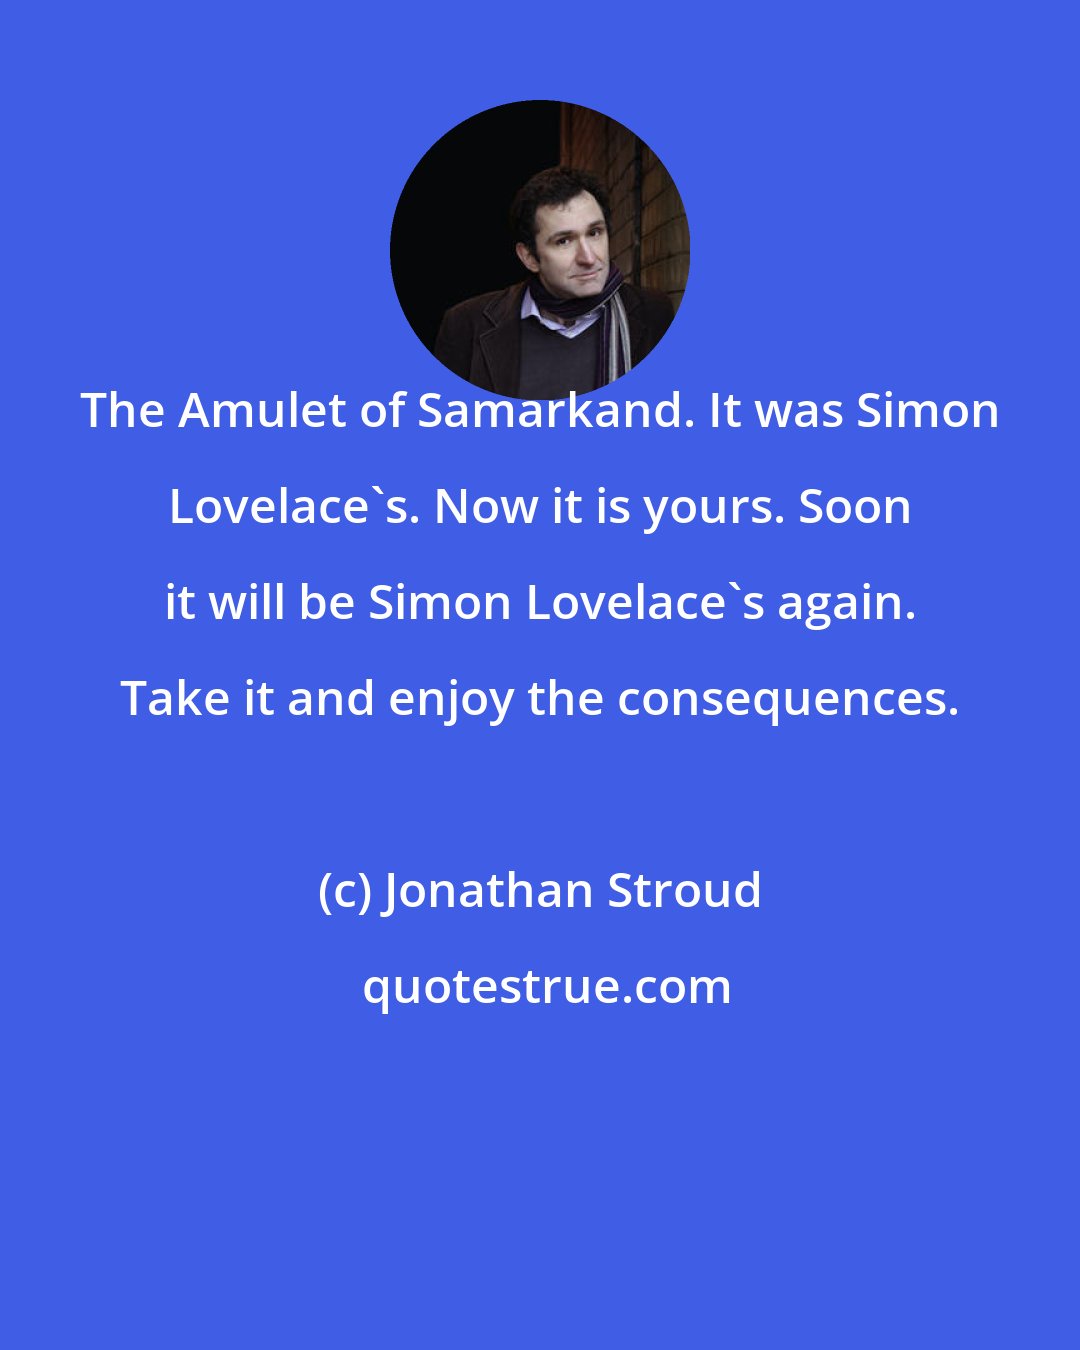 Jonathan Stroud: The Amulet of Samarkand. It was Simon Lovelace's. Now it is yours. Soon it will be Simon Lovelace's again. Take it and enjoy the consequences.